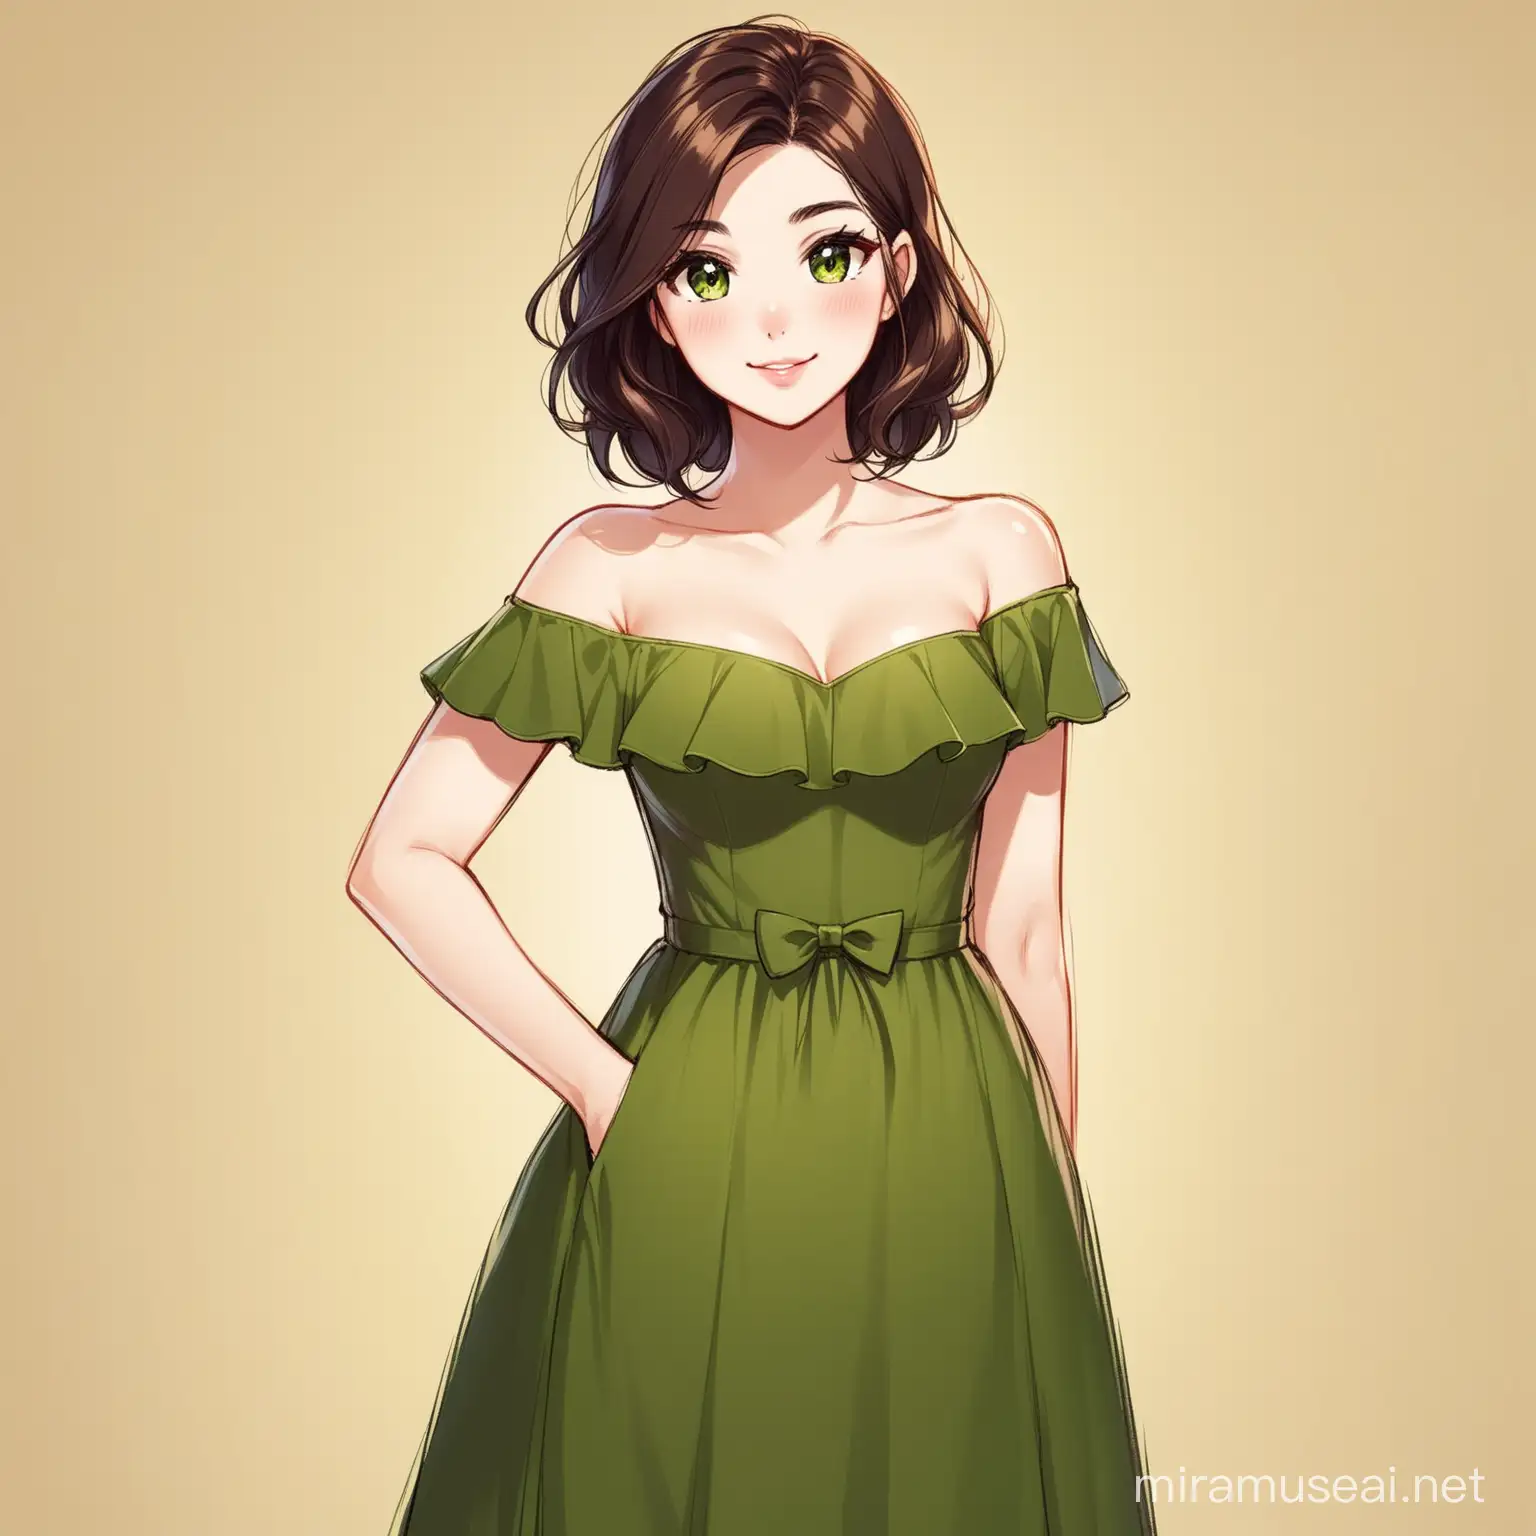 My name is Carmen. I am 30 years old and identify myself as a horse girl. My favourite drink is wine and my favourite piece of clothing is a dress. My favourite color is olive green. How should I dress up for the theme party with my friends? Please depict a person.